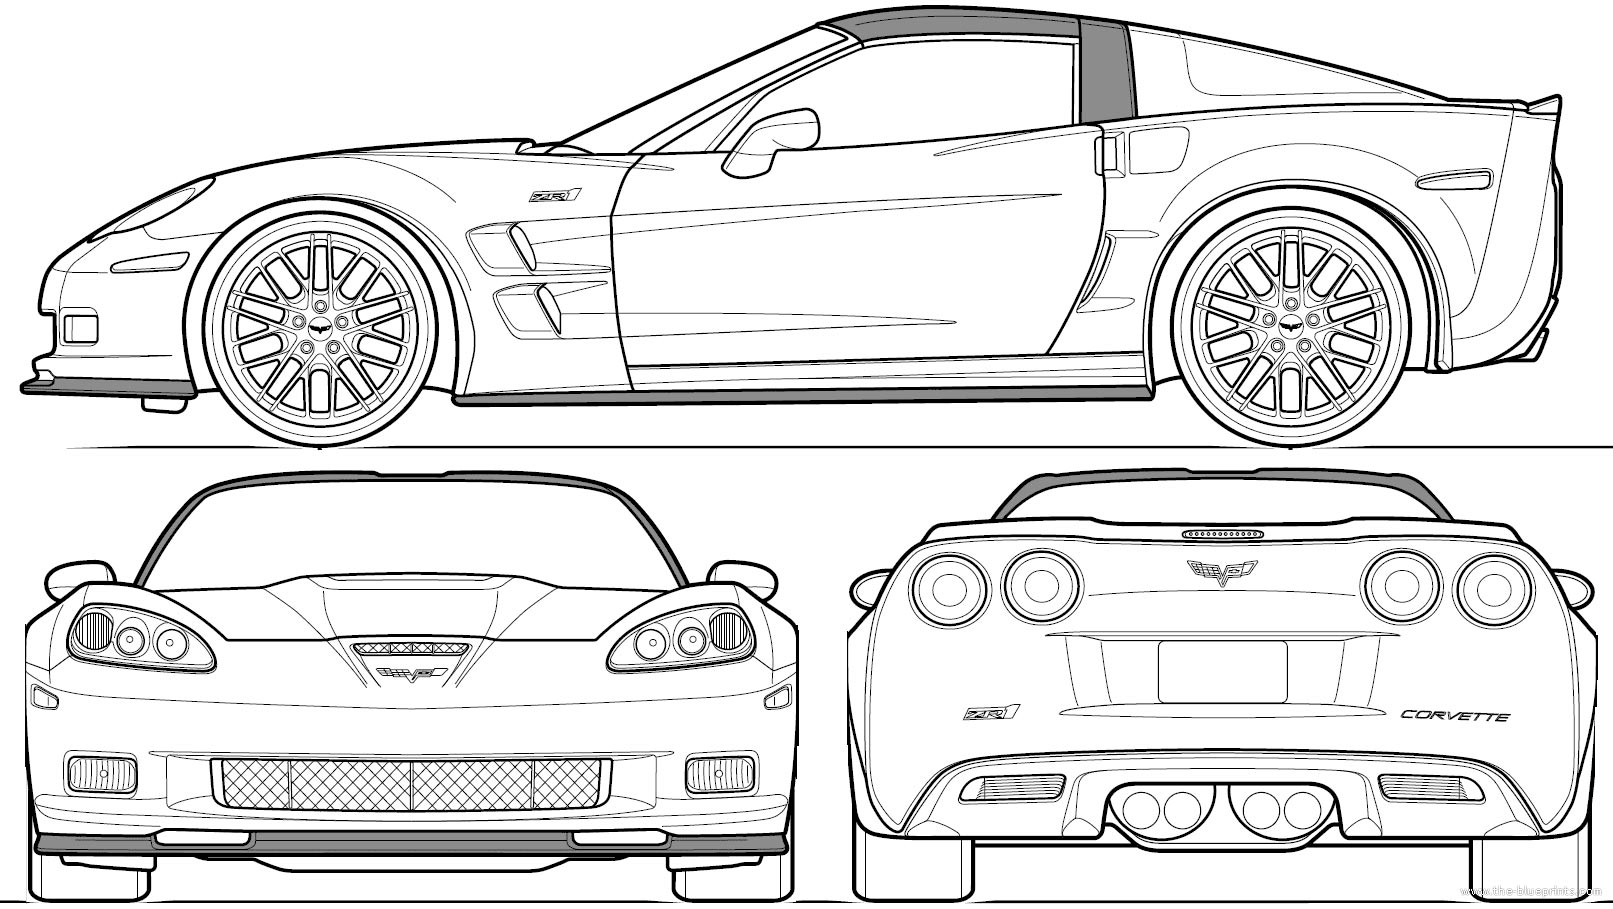 Fighting Boredom During Lockdown How About Some Corvette Coloring Pages Corvette Sales News Lifestyle How to draw corvette cars coloring pages to color, print and download for free along with bunch of favorite corvette cars coloring page for kids. corvette coloring pages